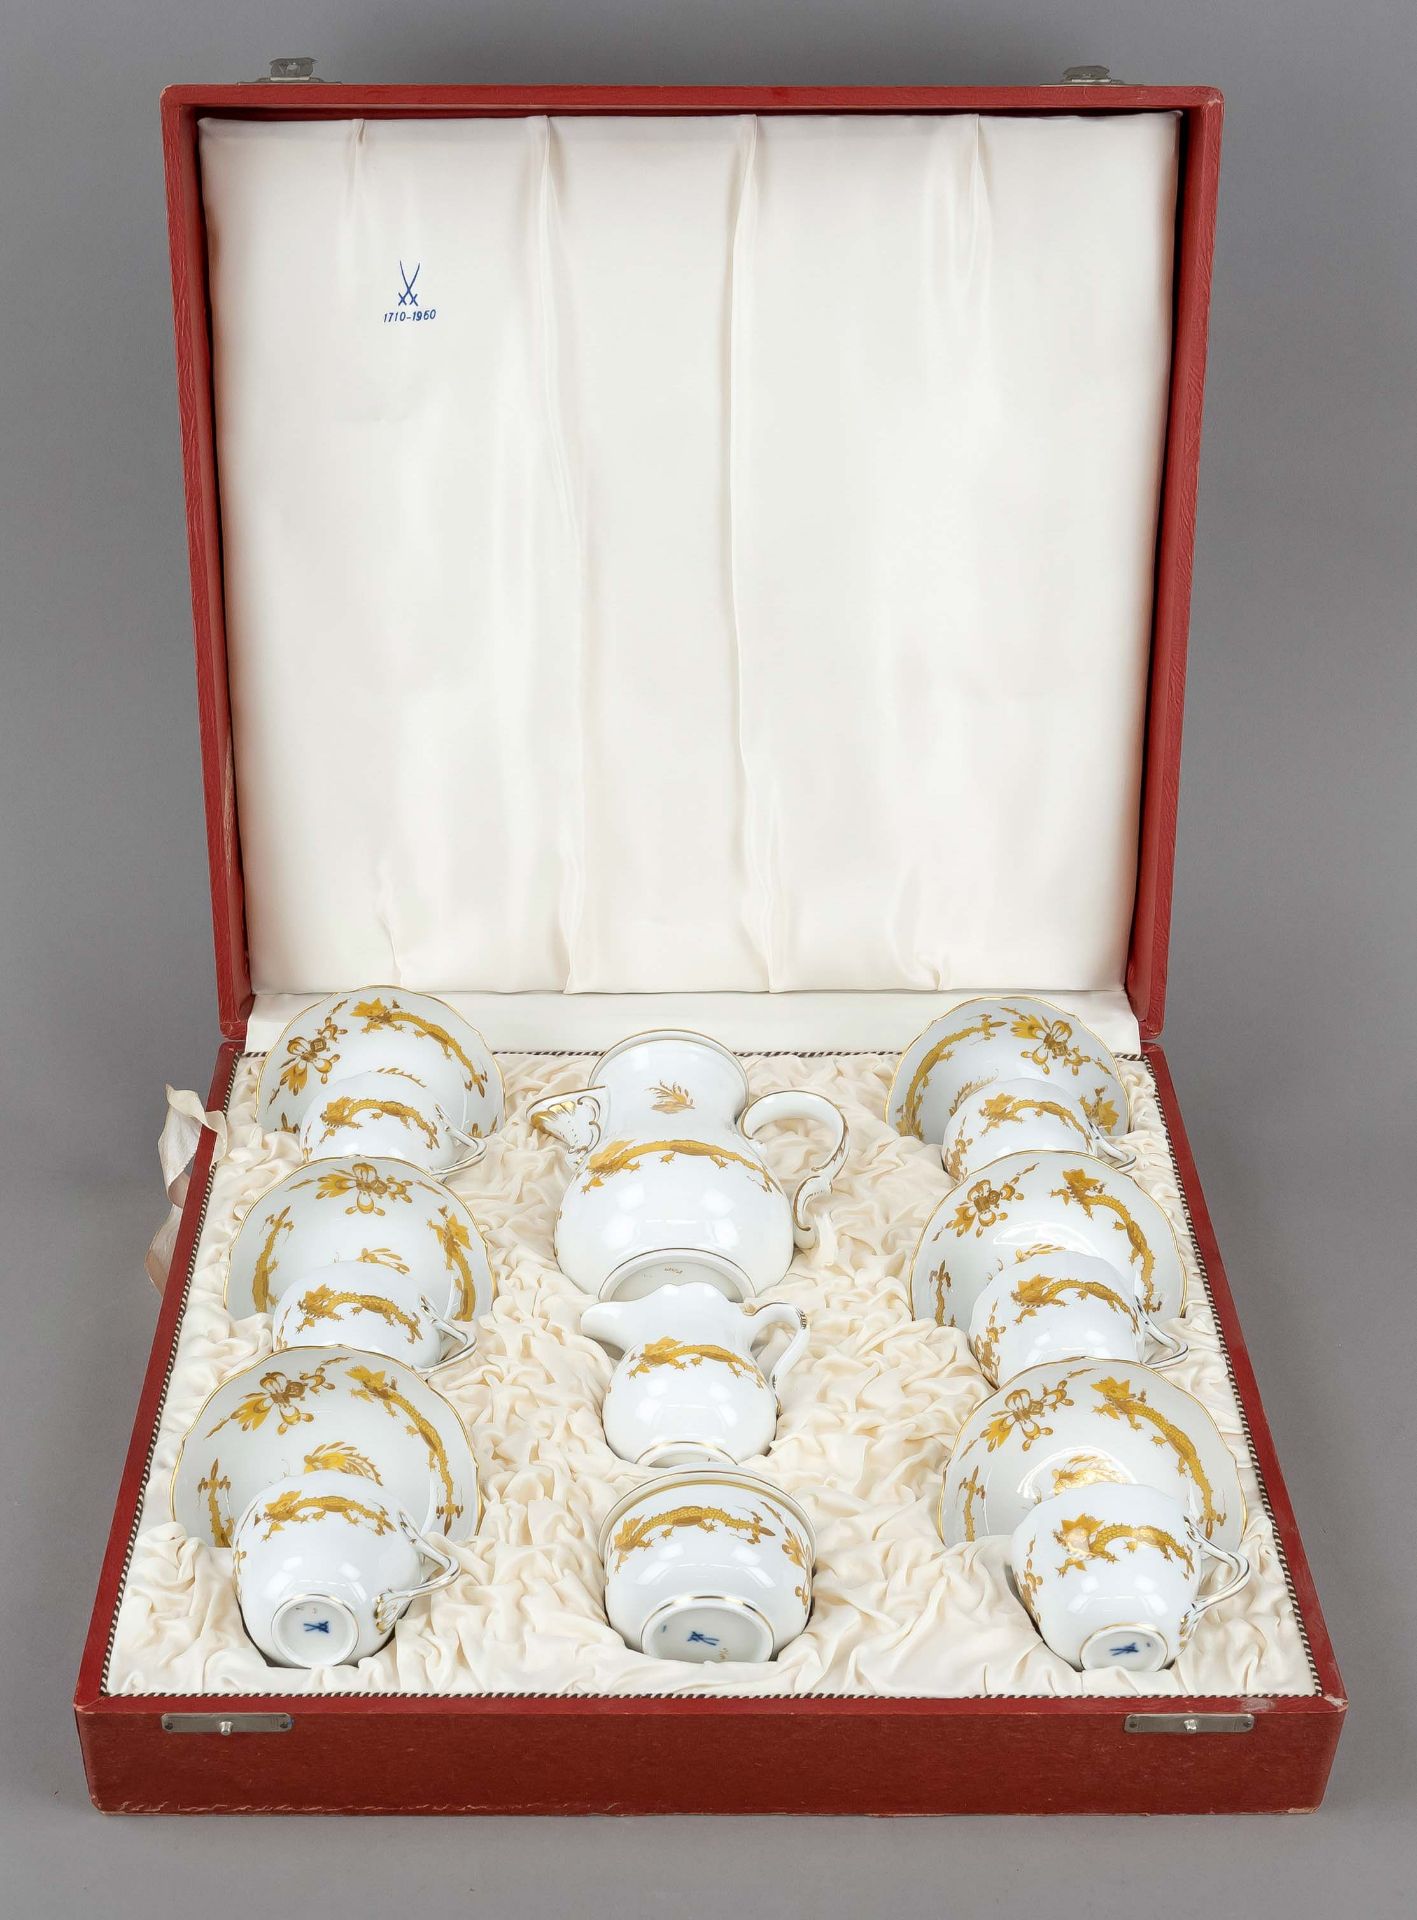 Mocha service for 6 persons, 15-piece set, Meissen circa 1960, 1st choice, form new cut-out, decor - Image 2 of 2